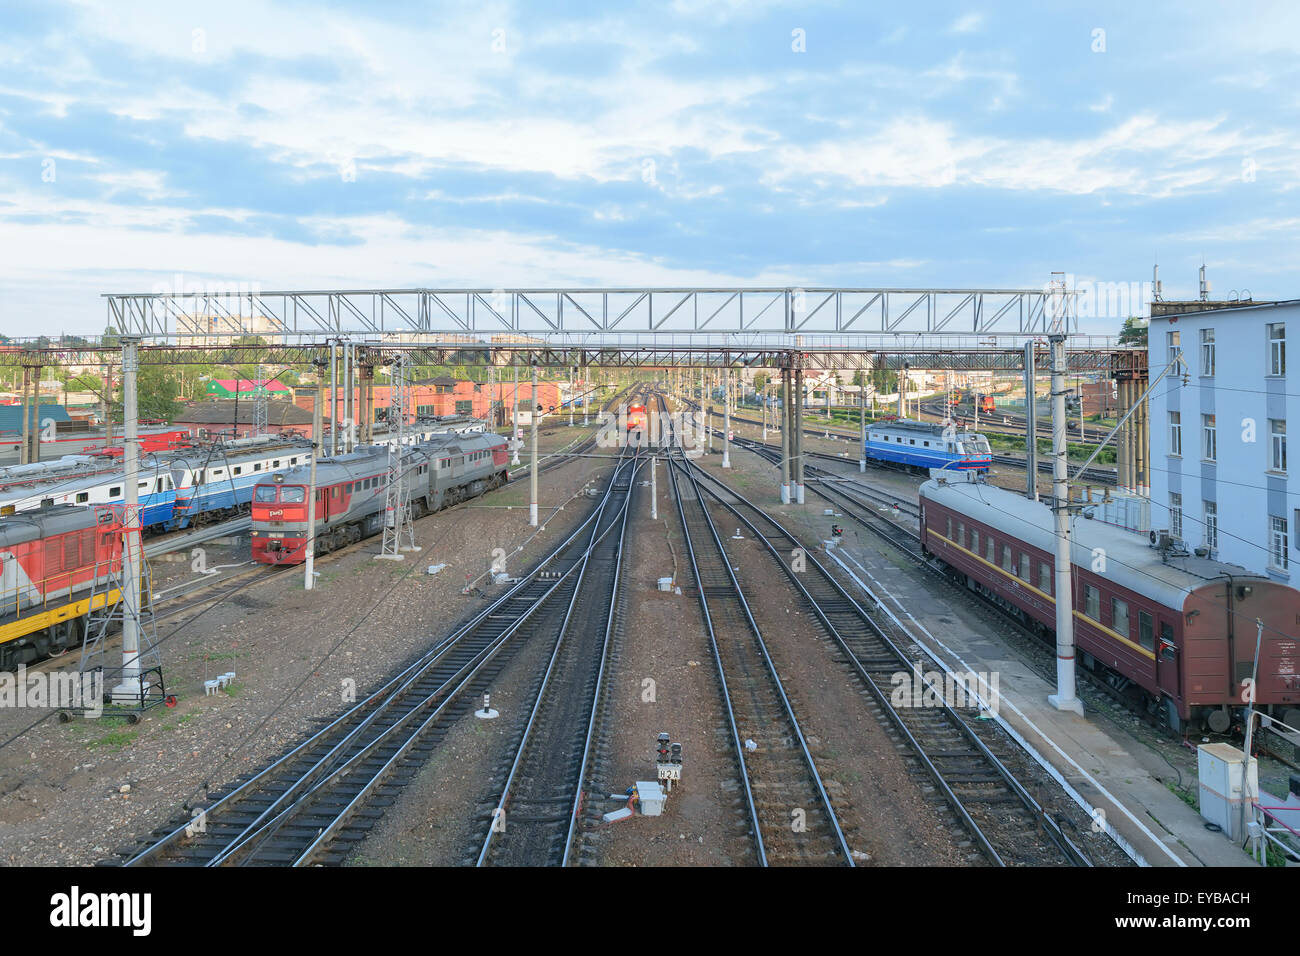 Major train station. Rails stretching into the distance. Flaw detector car is on the tracks near the building. Blue sky Stock Photo